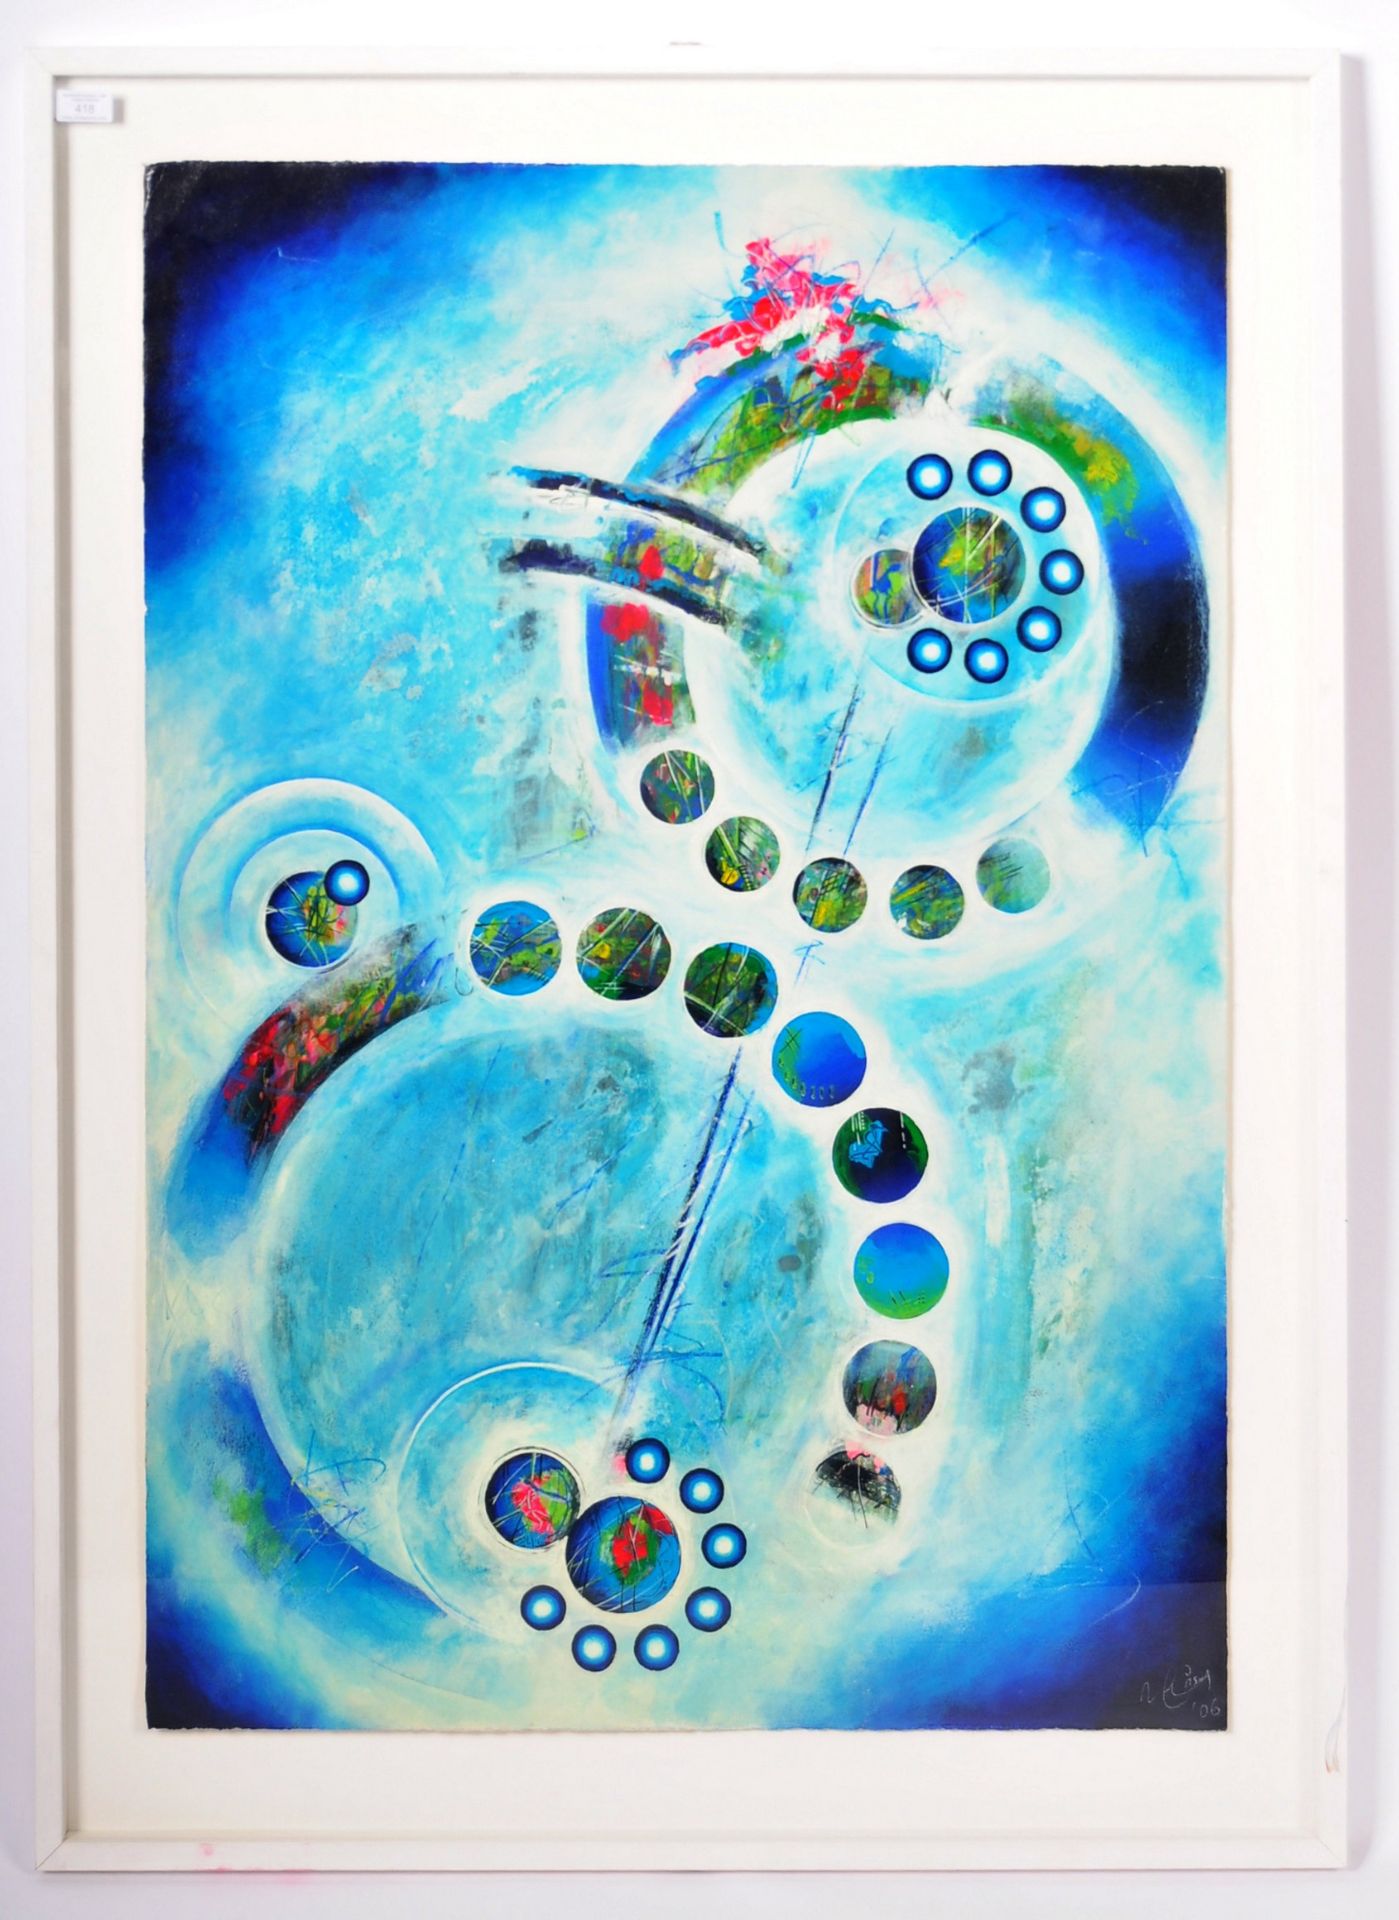 CONTEMPORARY MIXED MEDIA ABSTRACT ART PAINTING DEPICTING PLANETS